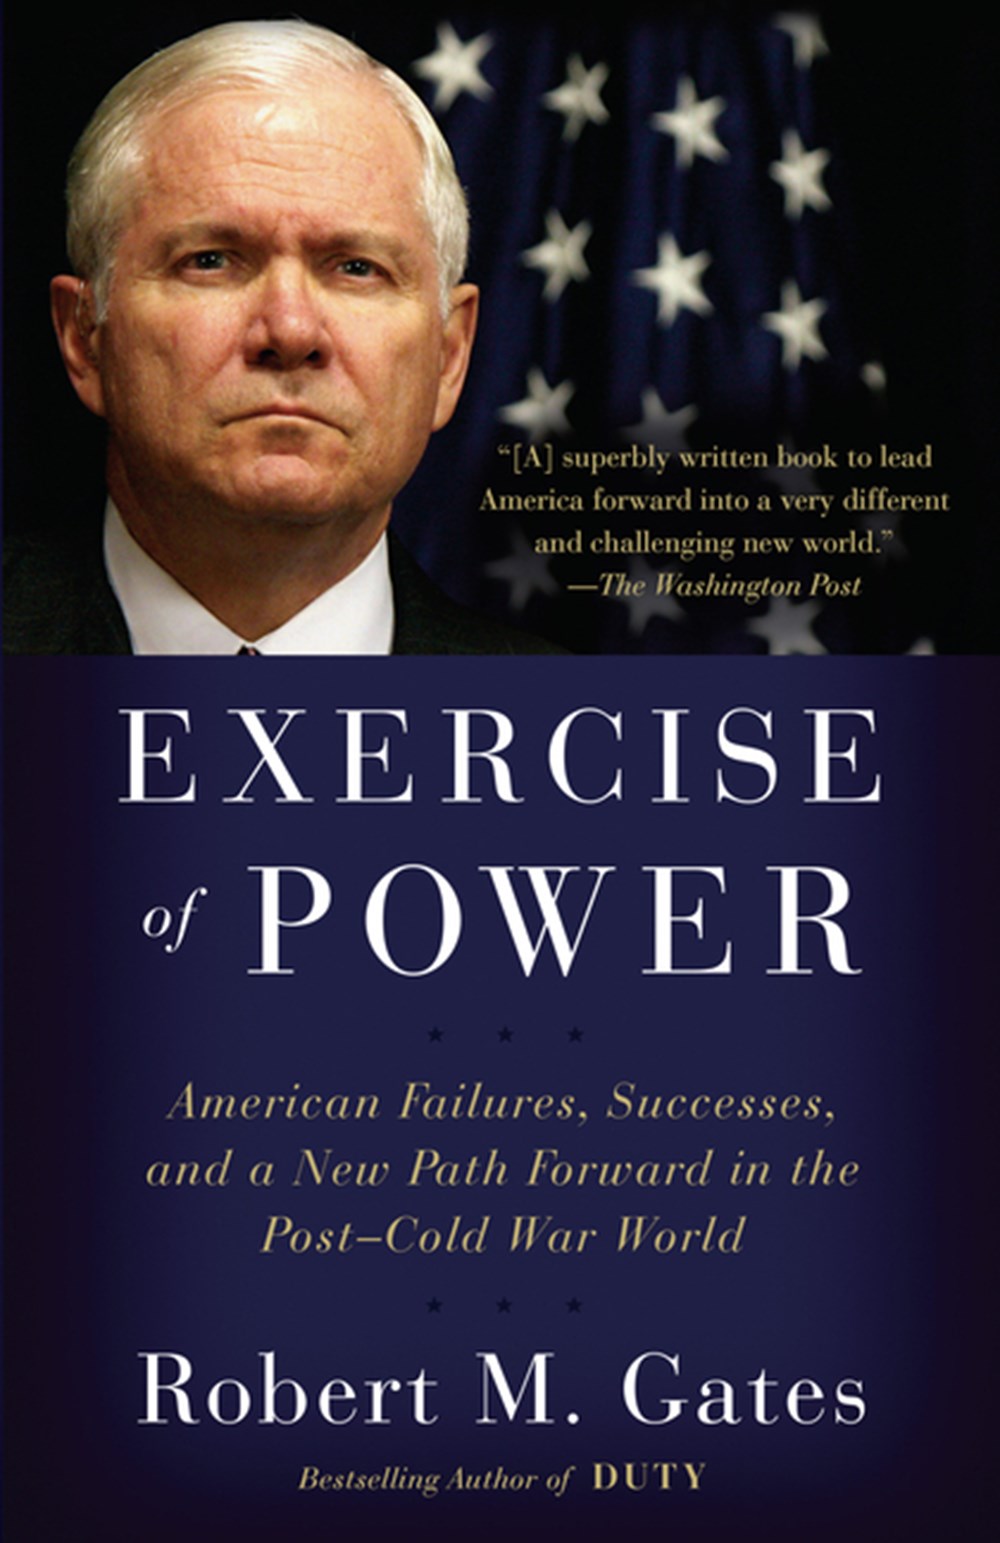 Exercise of Power American Failures, Successes, and a New Path Forward in the Post-Cold War World